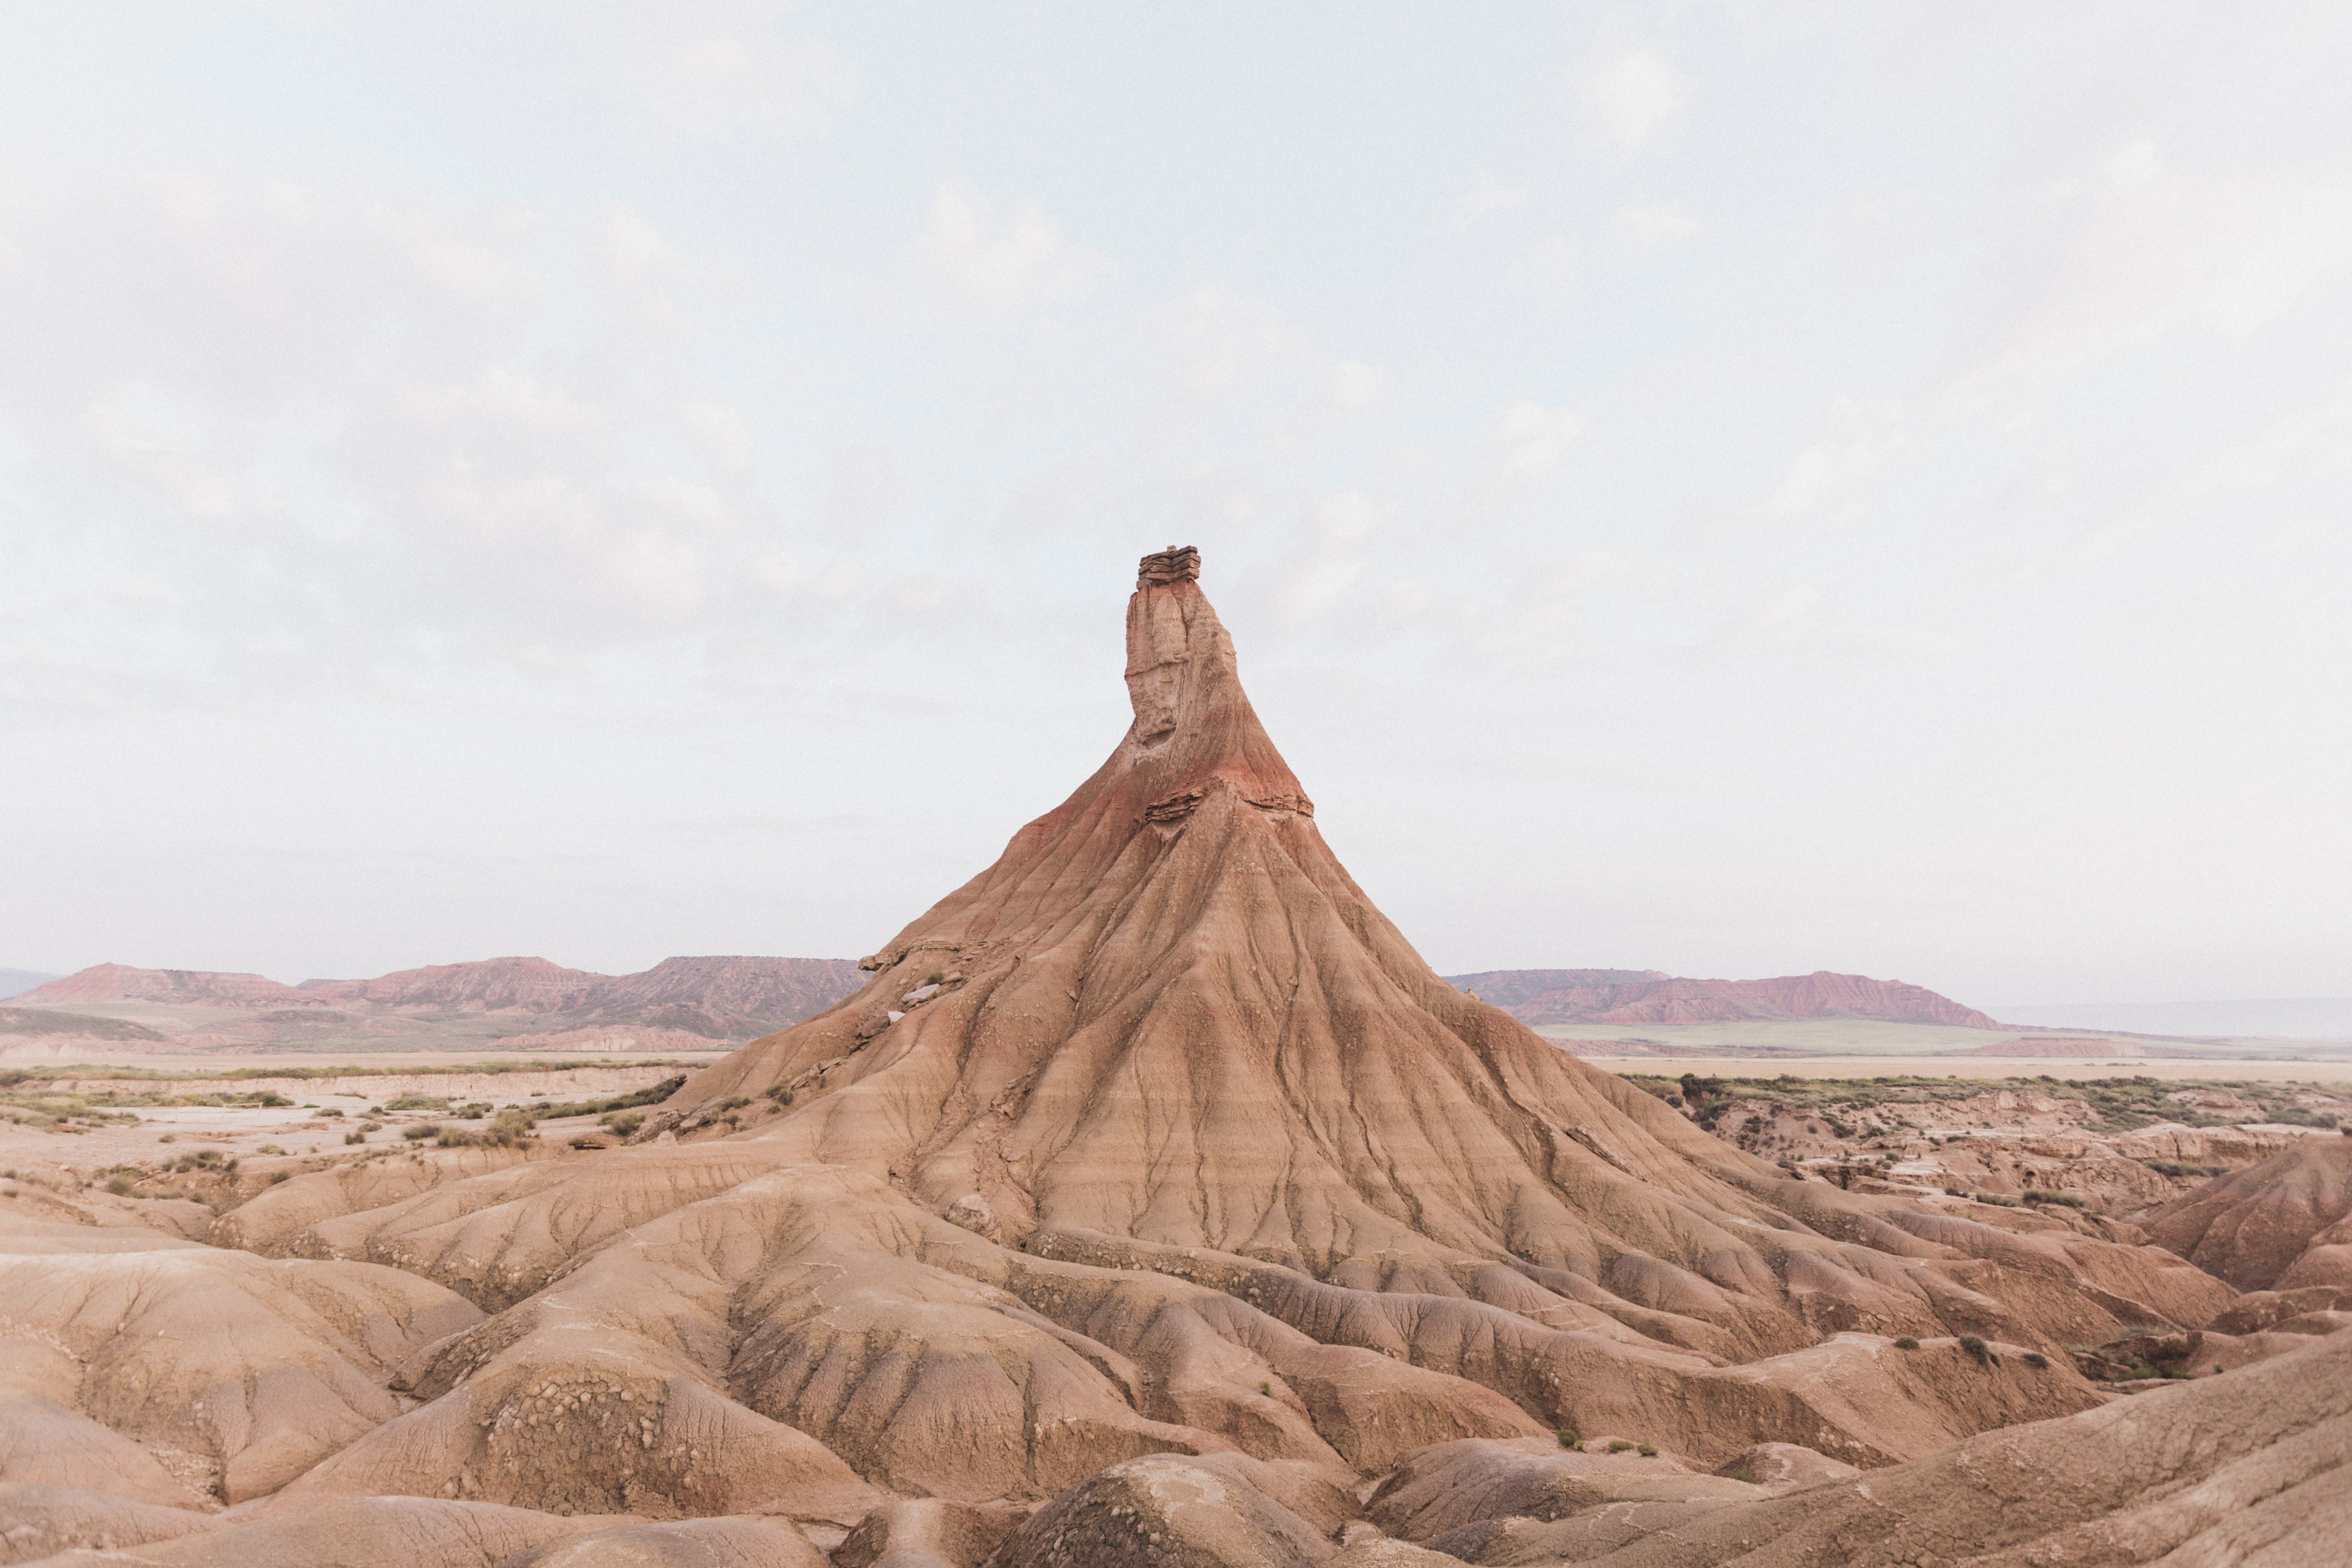 Game of Thrones Filming Location: Bardenas Reales Natural Park